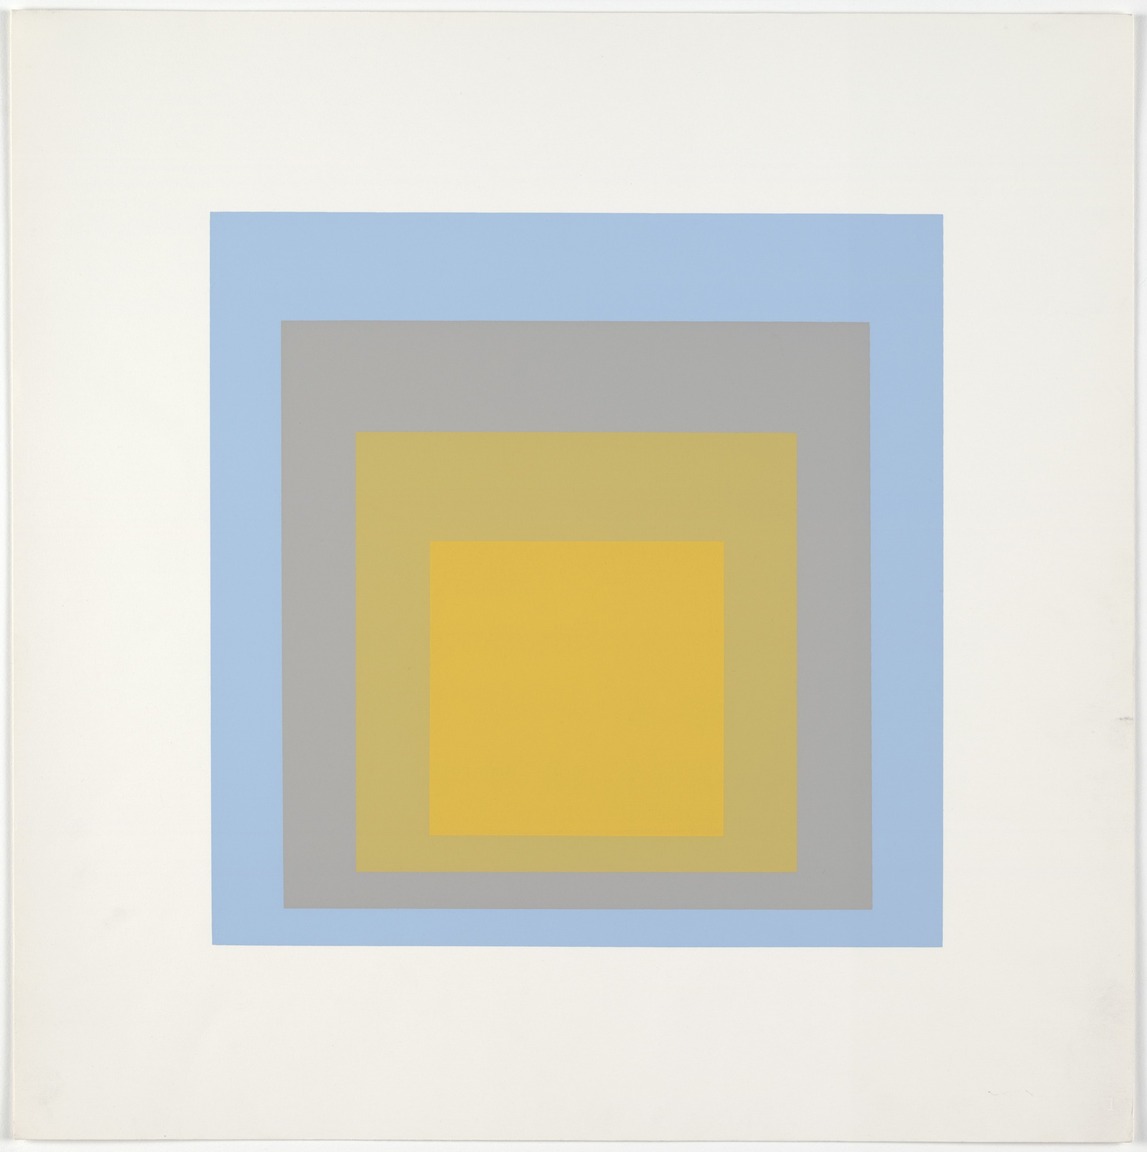 Josef Albers: From the series "Homage to the Square" (portfolio of ten screenprints), 1962